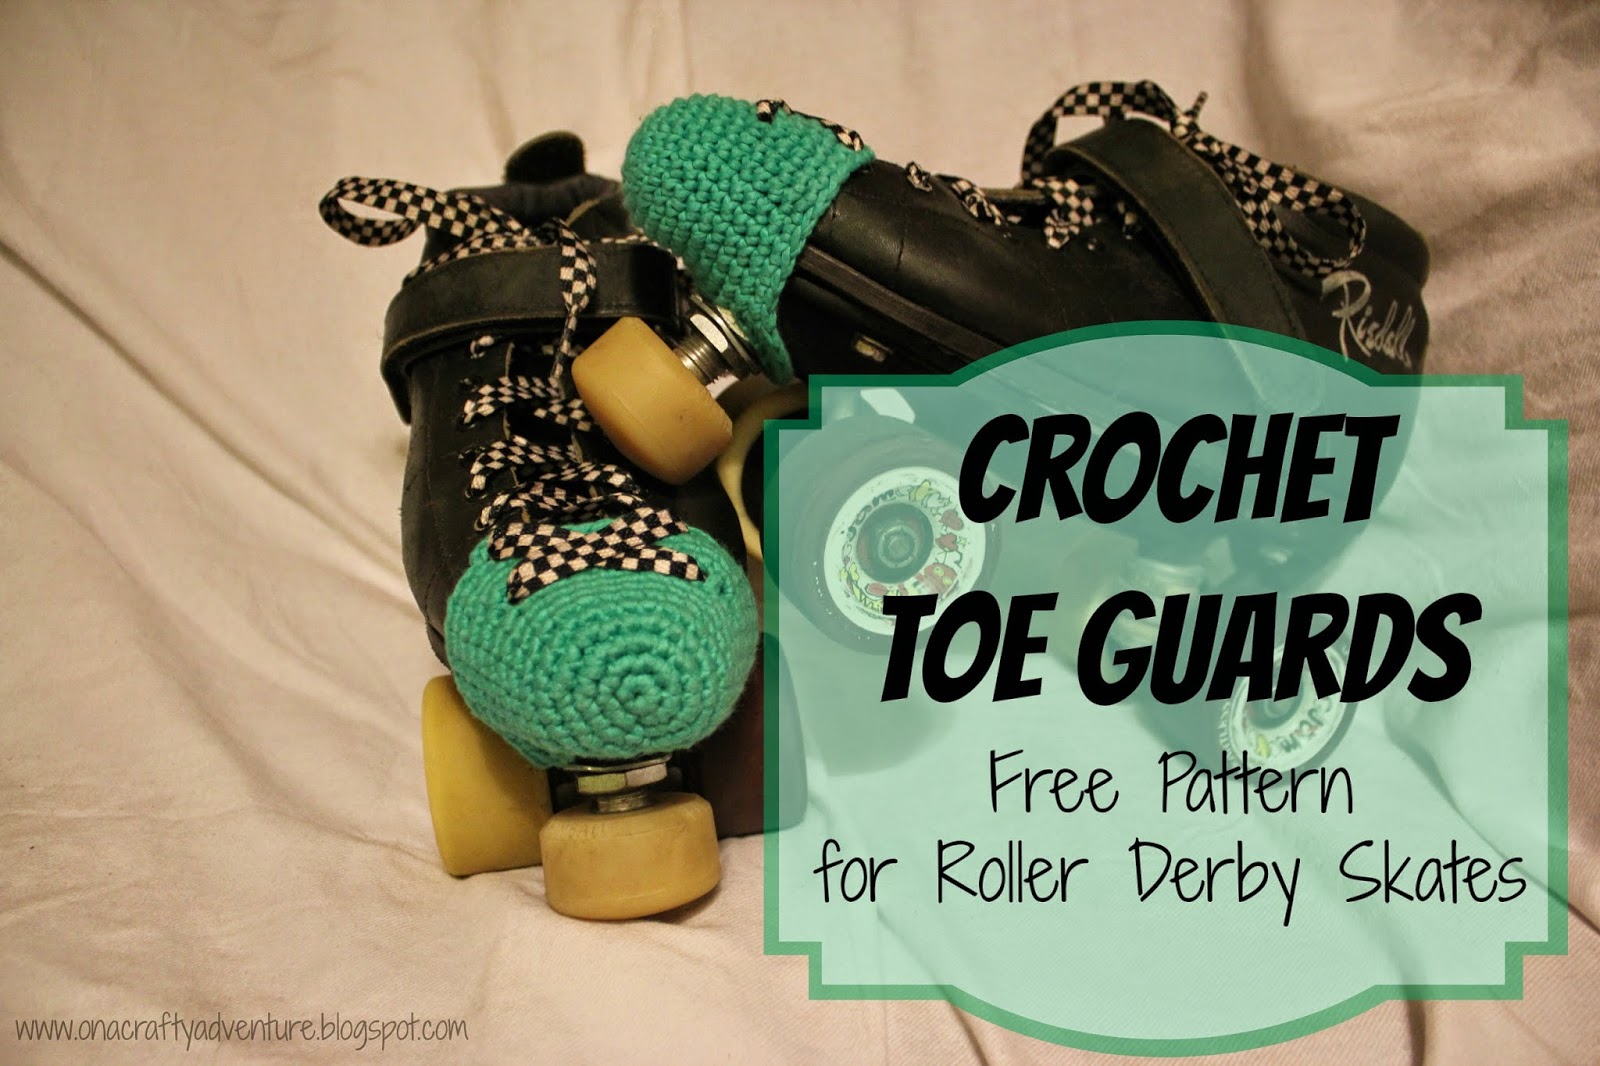 On A Crafty Adventure: Crochet Toe Guard Pattern for Roller Skates